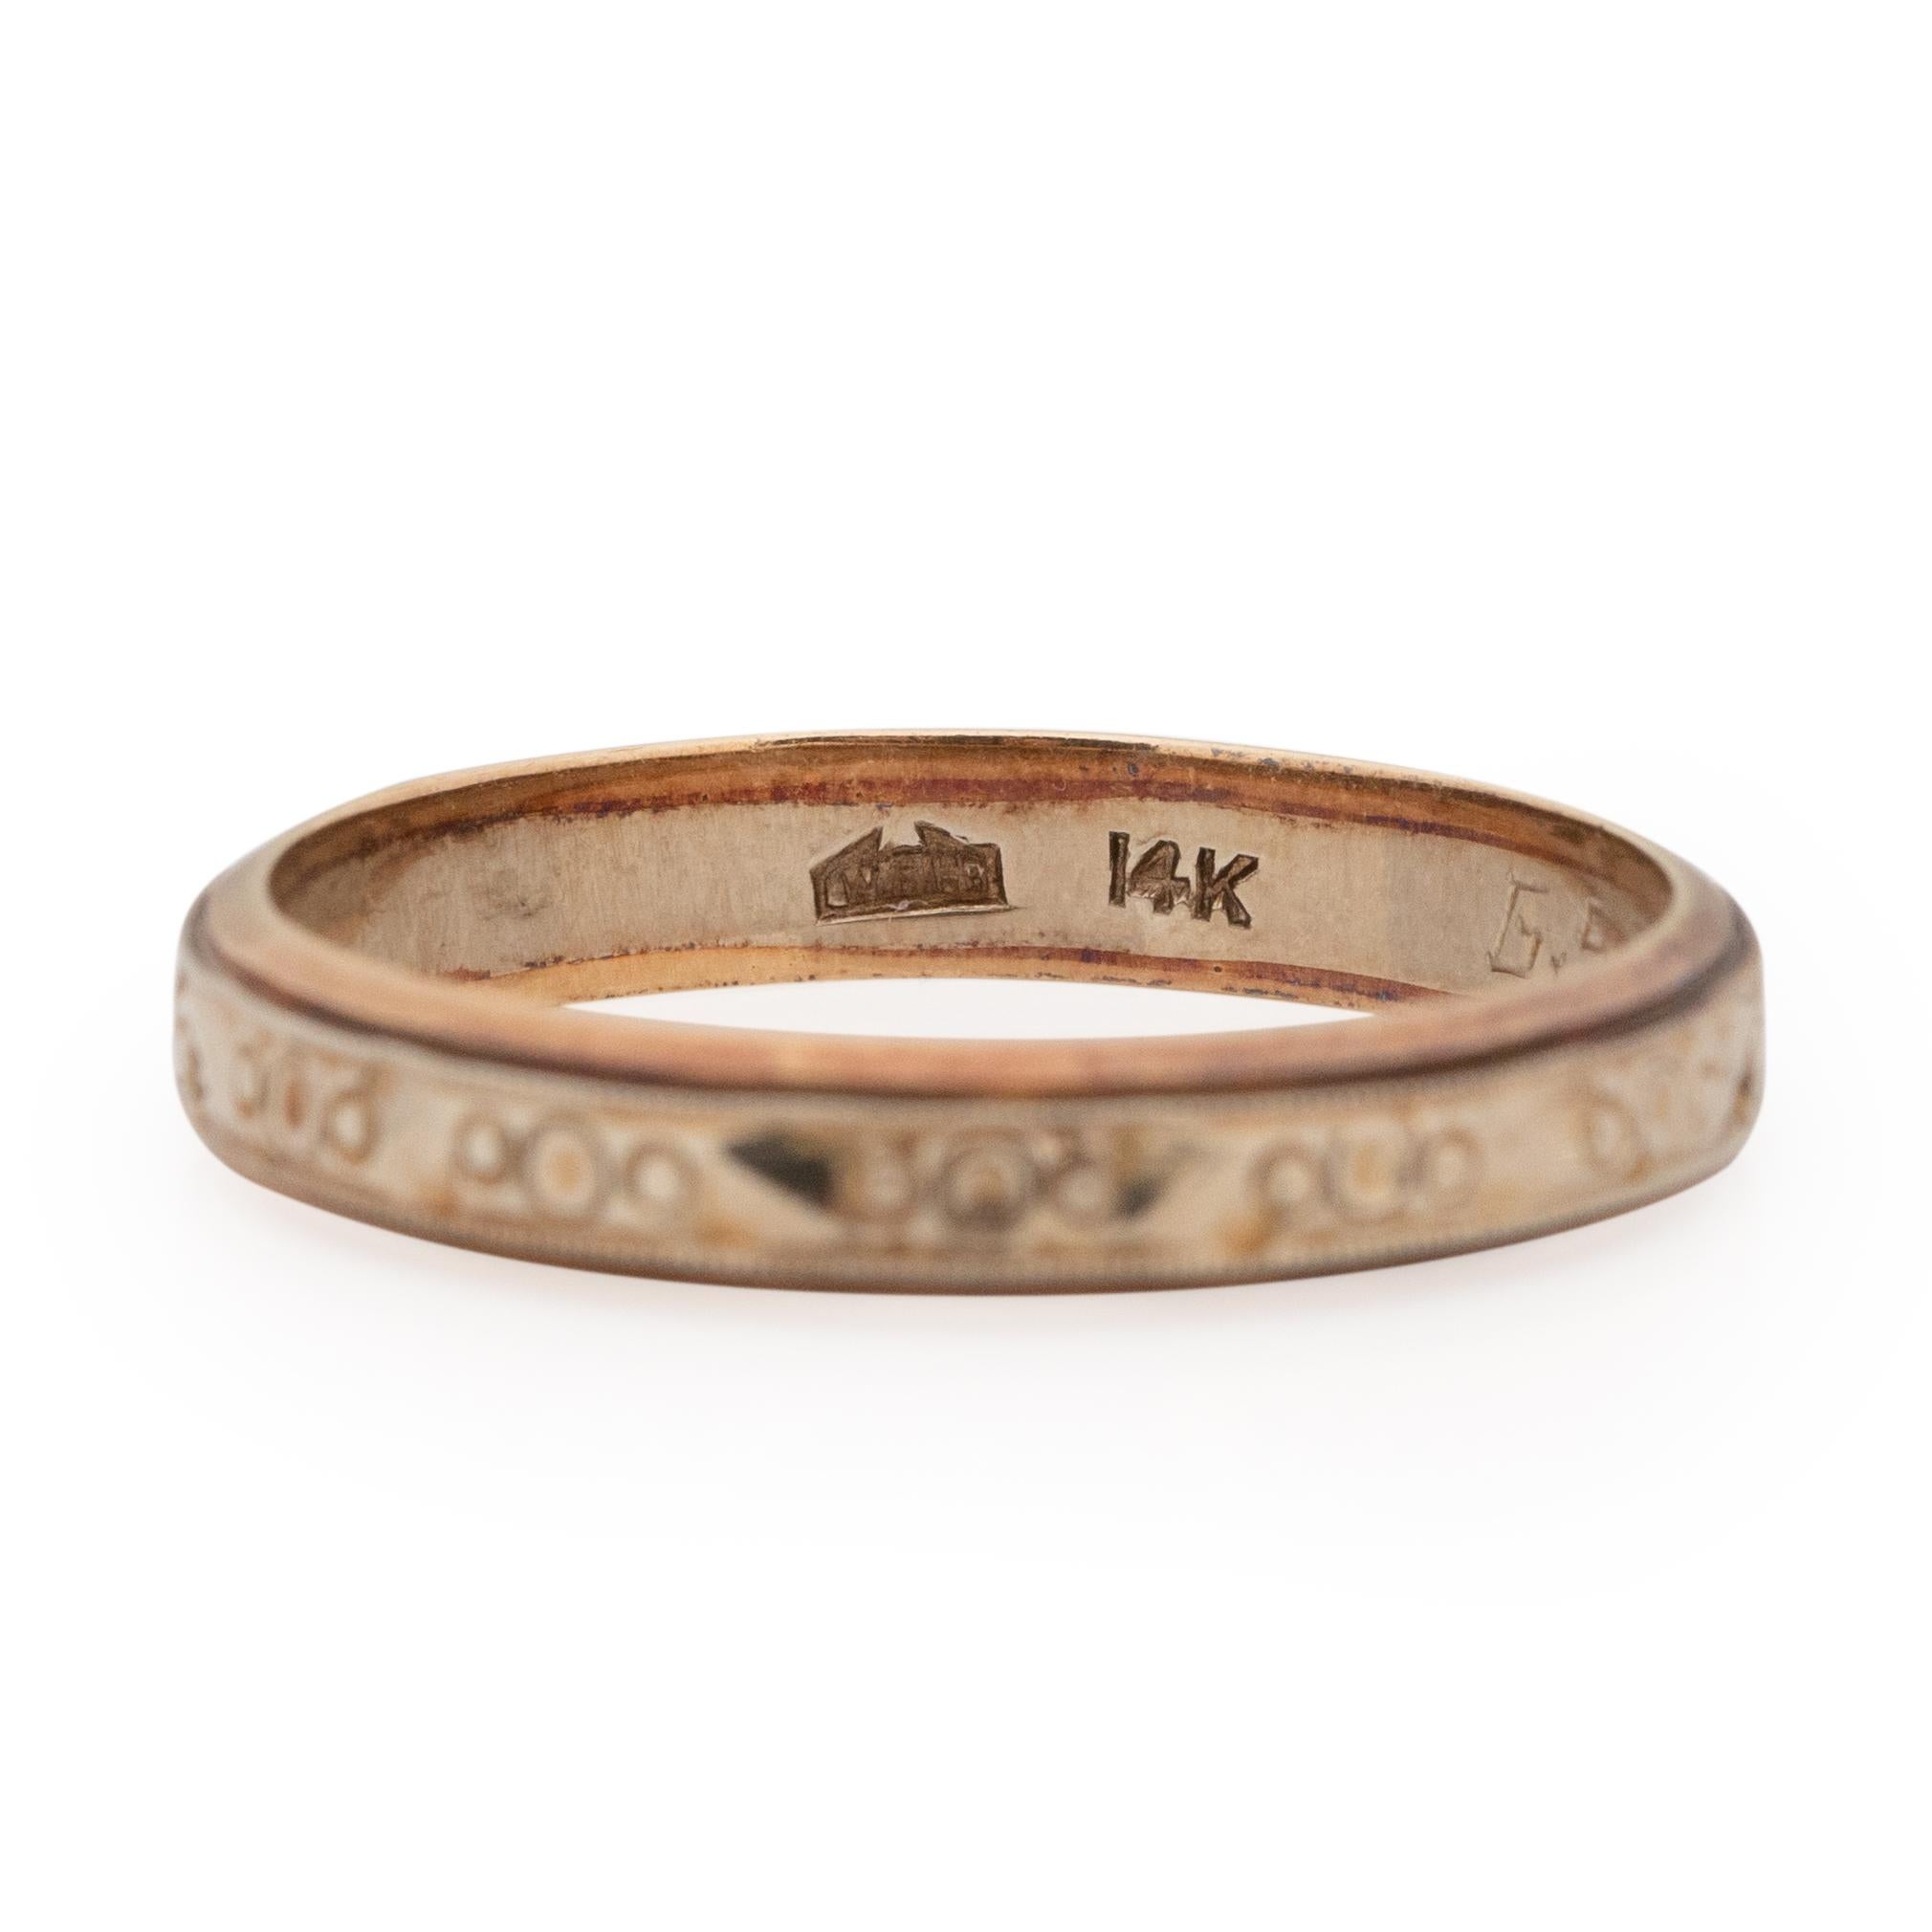 Here we have a beautifully carved geometric pattered unisex stackable wedding band. The center of this ring is 14K white gold, along either side of the white gold band is rose gold borders. The circle carved details are timeless, and versatile. To